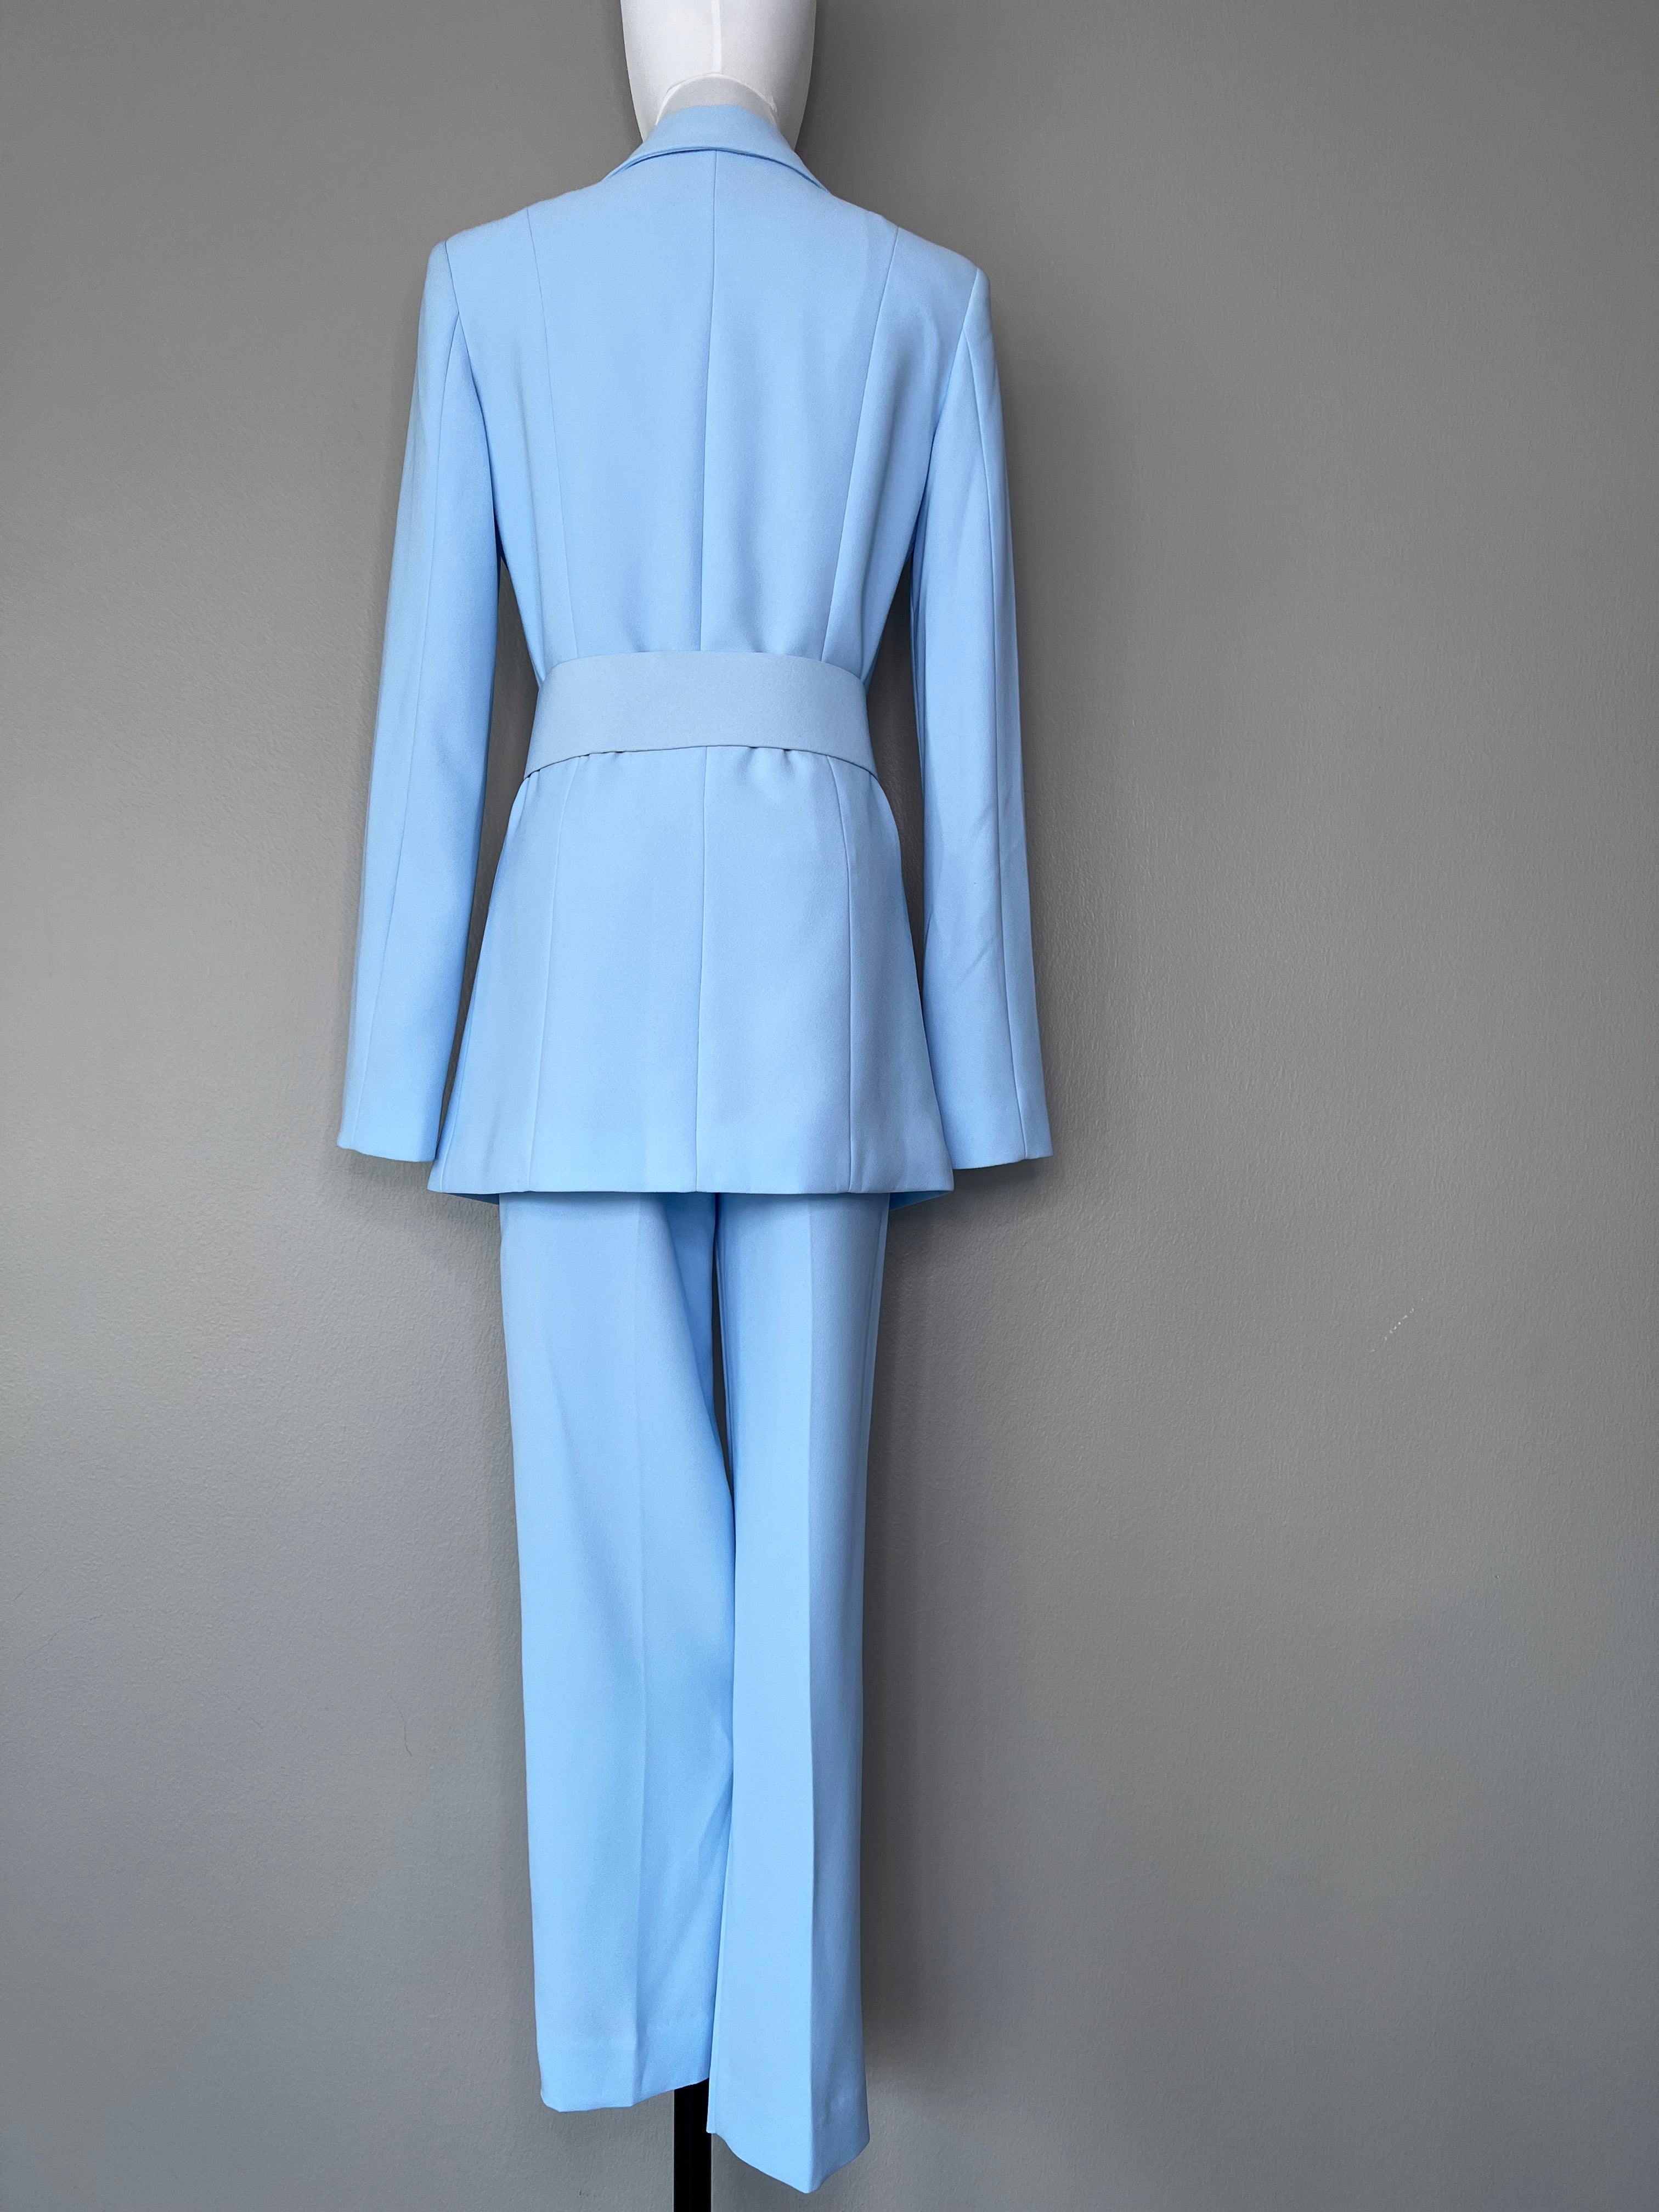 A set of Light blue suit set with big buttons, belt, and tight over the ankle pants. - GLAMODA